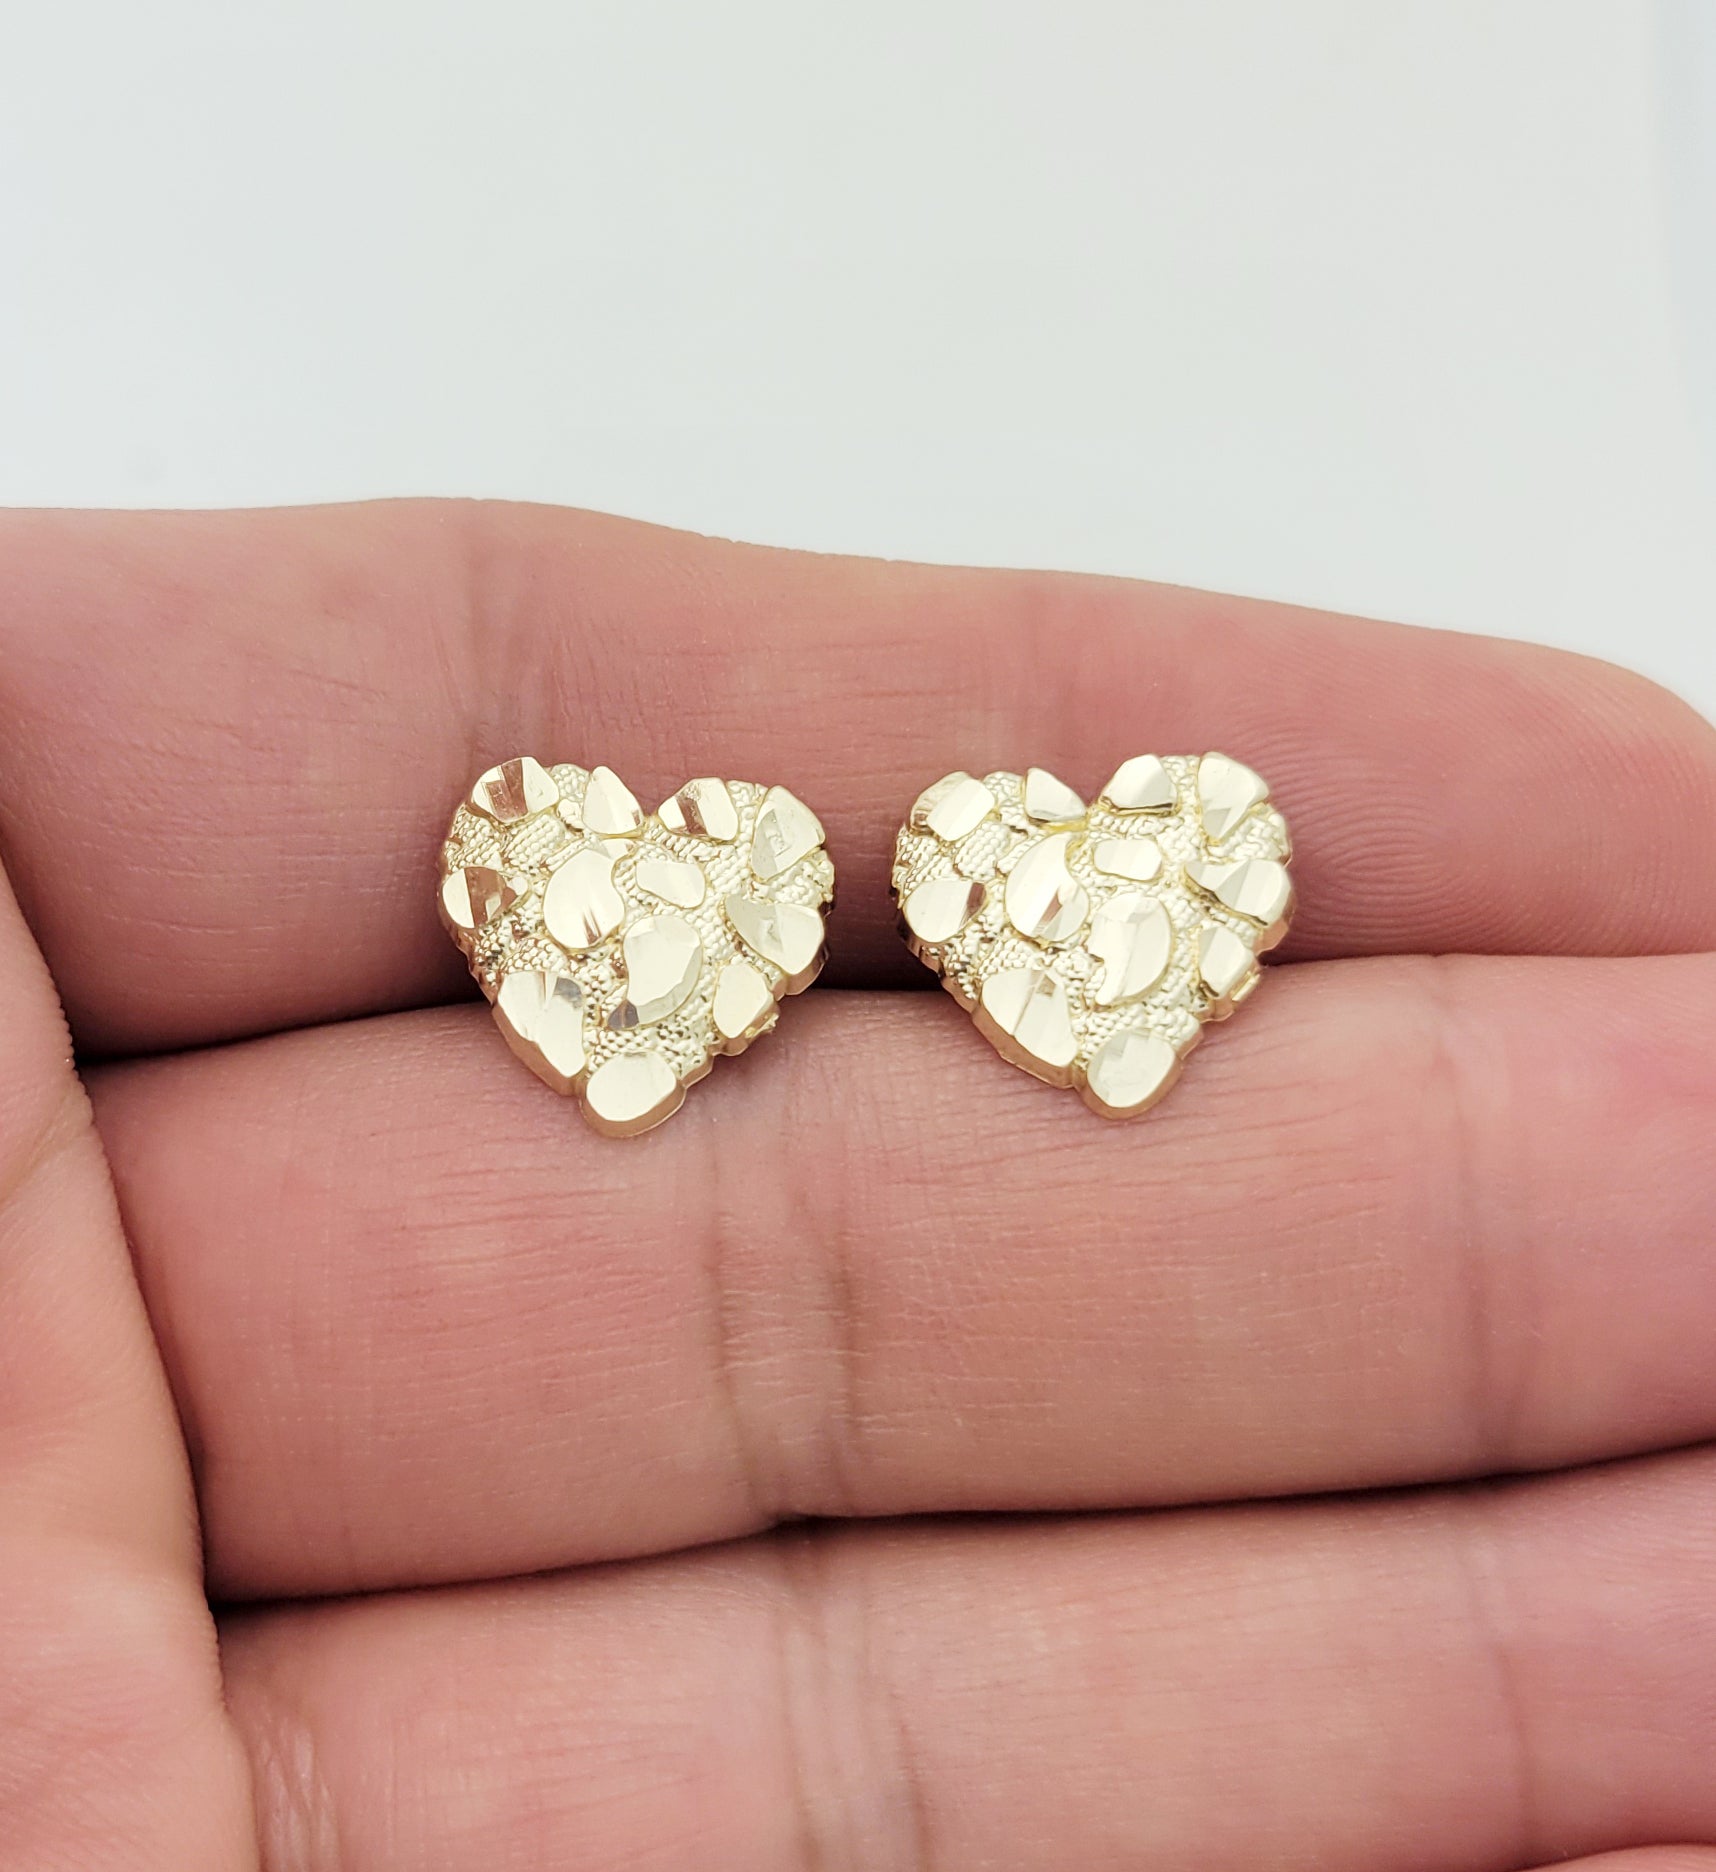 Authentic 10K Gold Nugget Round Diamond Cut Stud Earrings